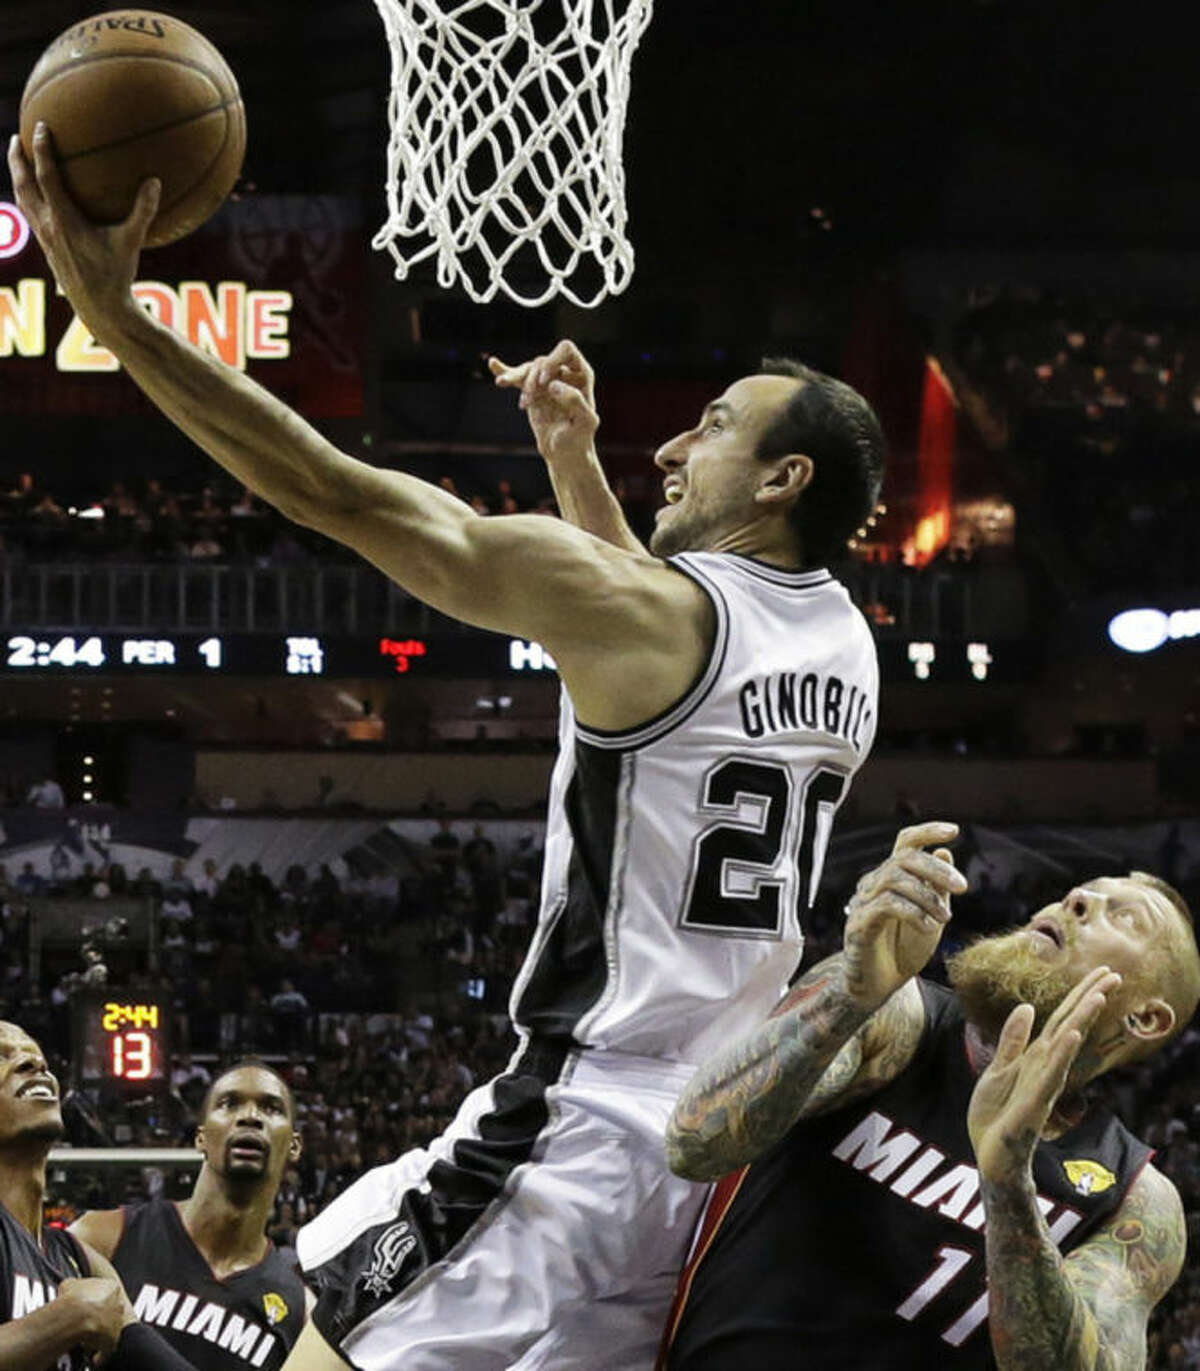 San Antonio Spurs guard Manu Ginobili (20) shoots over Miami Heat forward Chris Andersen during the first half in Game 2 of the NBA basketball finals on Sunday, June 8, 2014, in San Antonio. (AP Photo/Eric Gay)